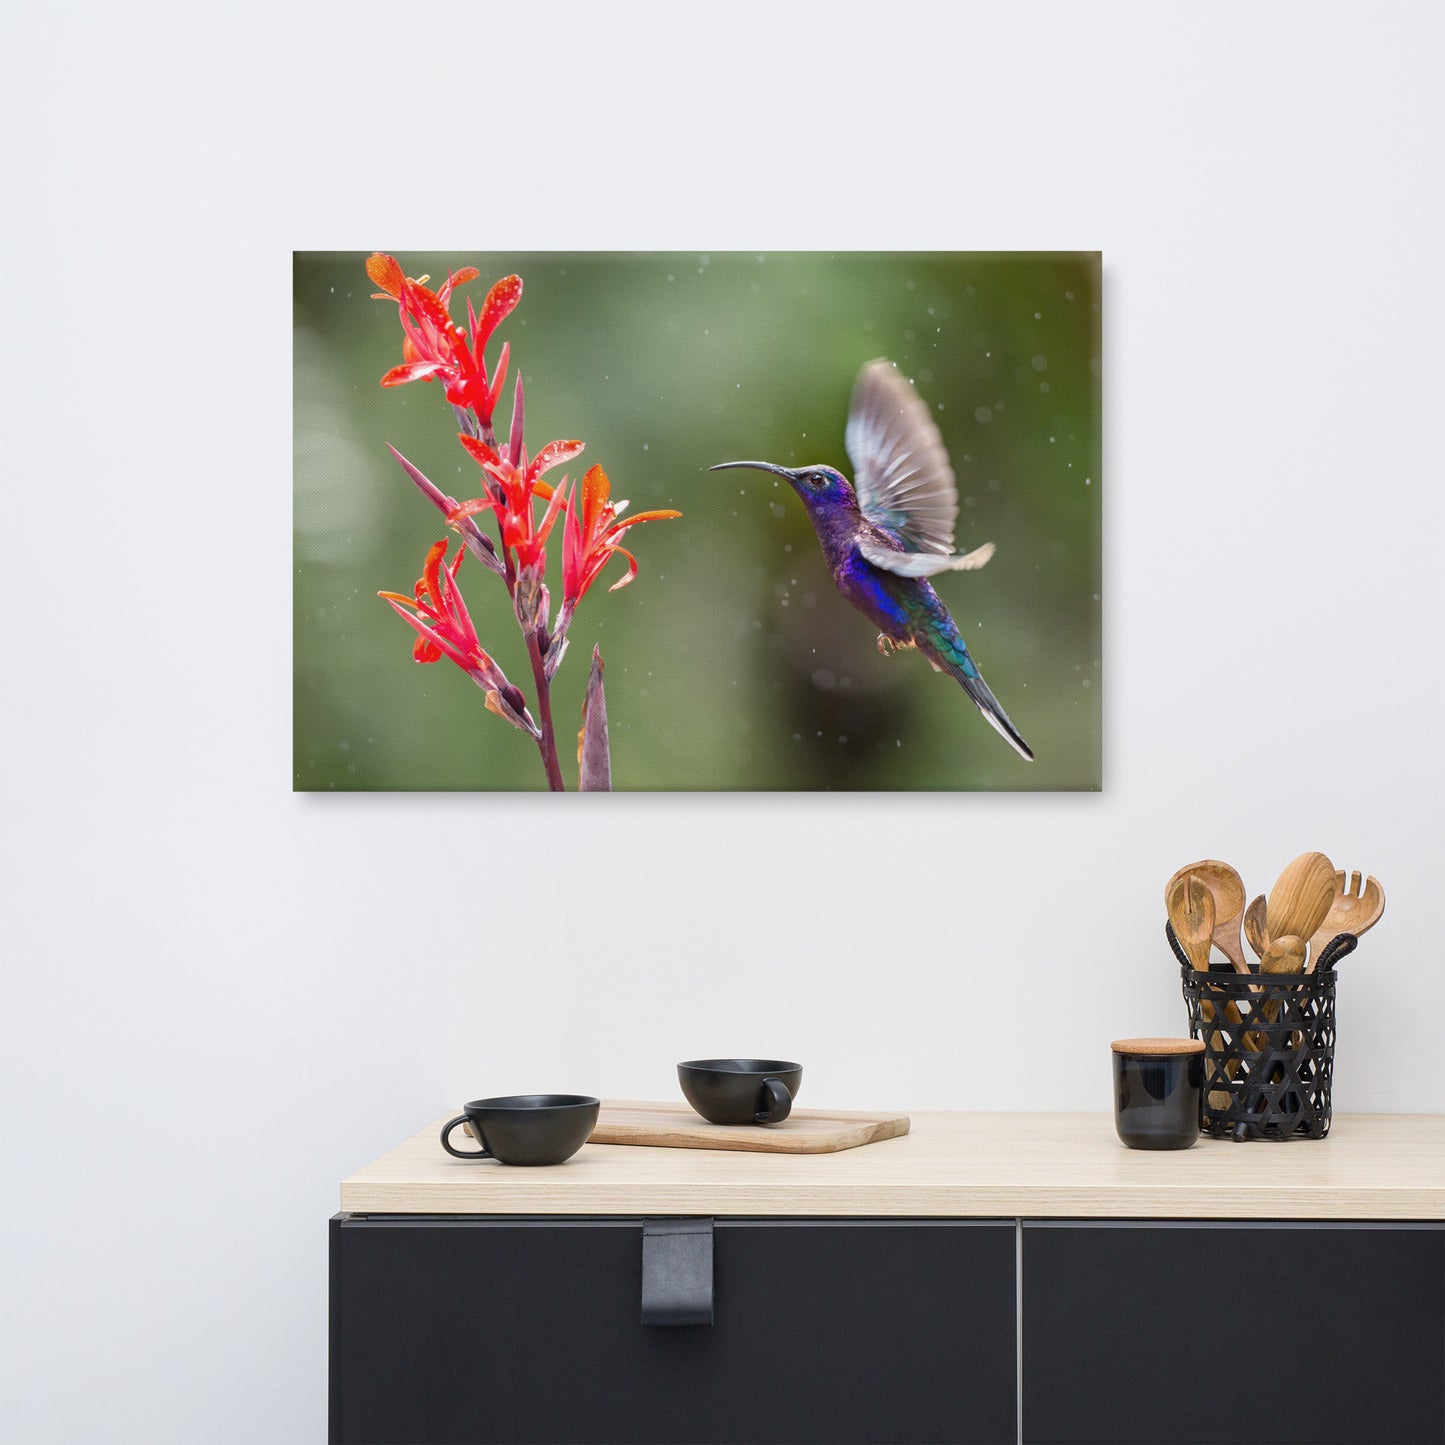 Hummingbird with Little Red Flowers Animal Wildlife Photograph Canvas Wall Art Prints